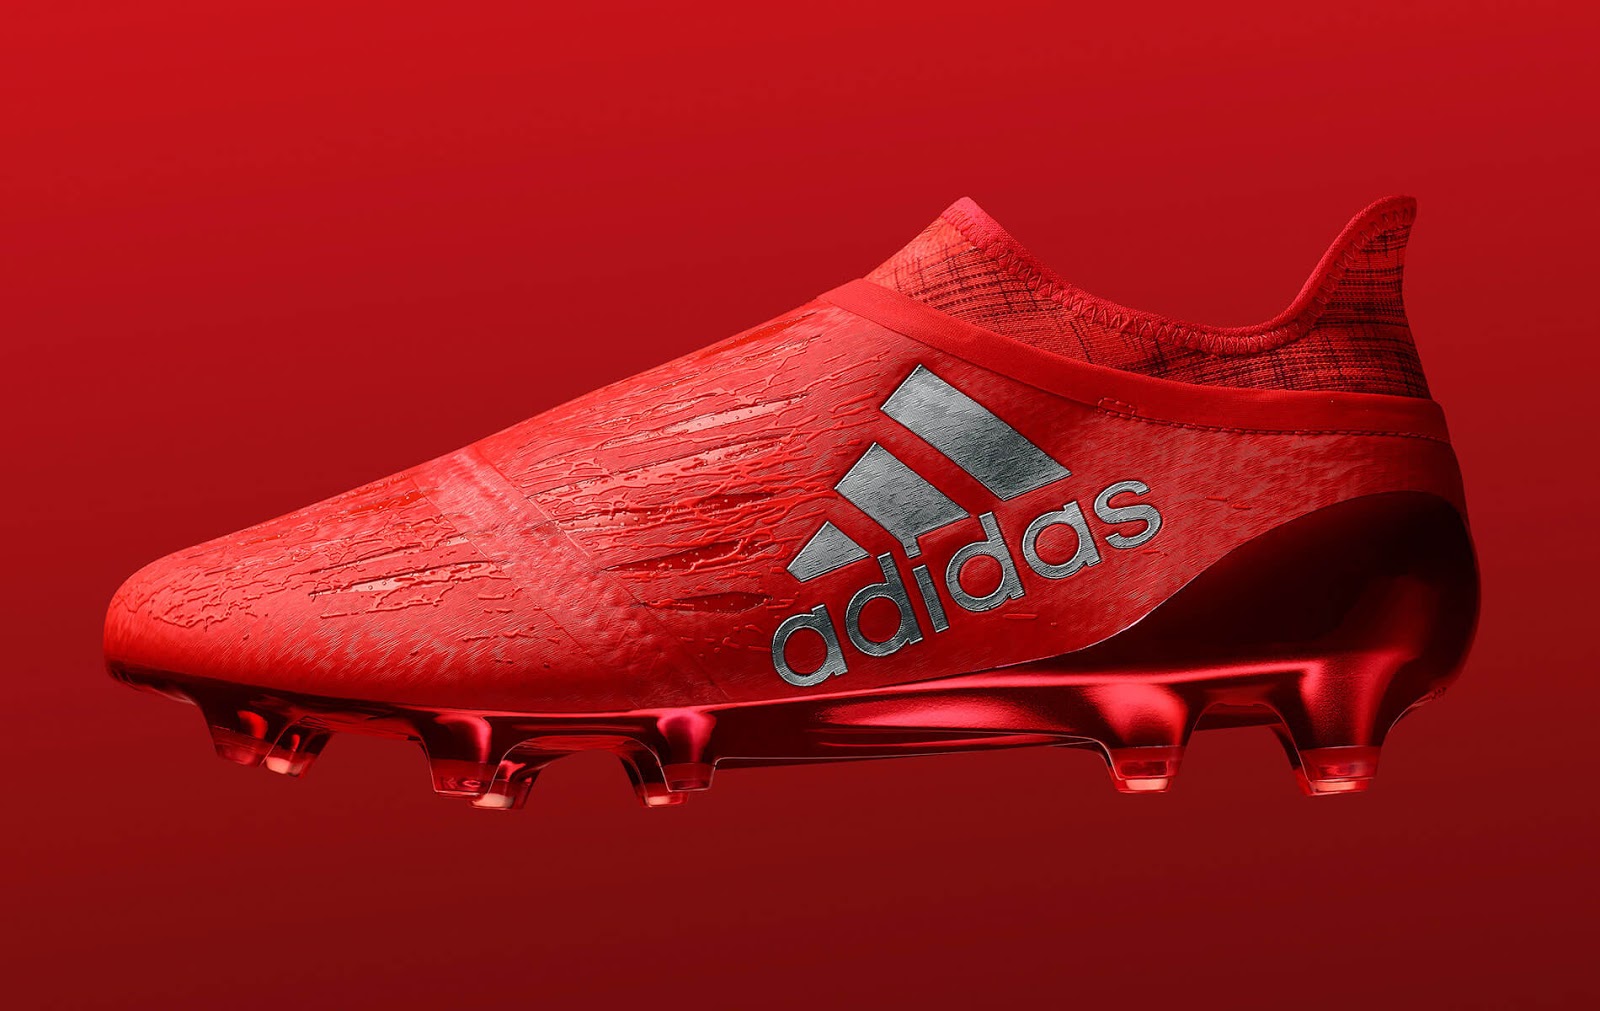 Red X 16+ 2016 Boots Released - Headlines